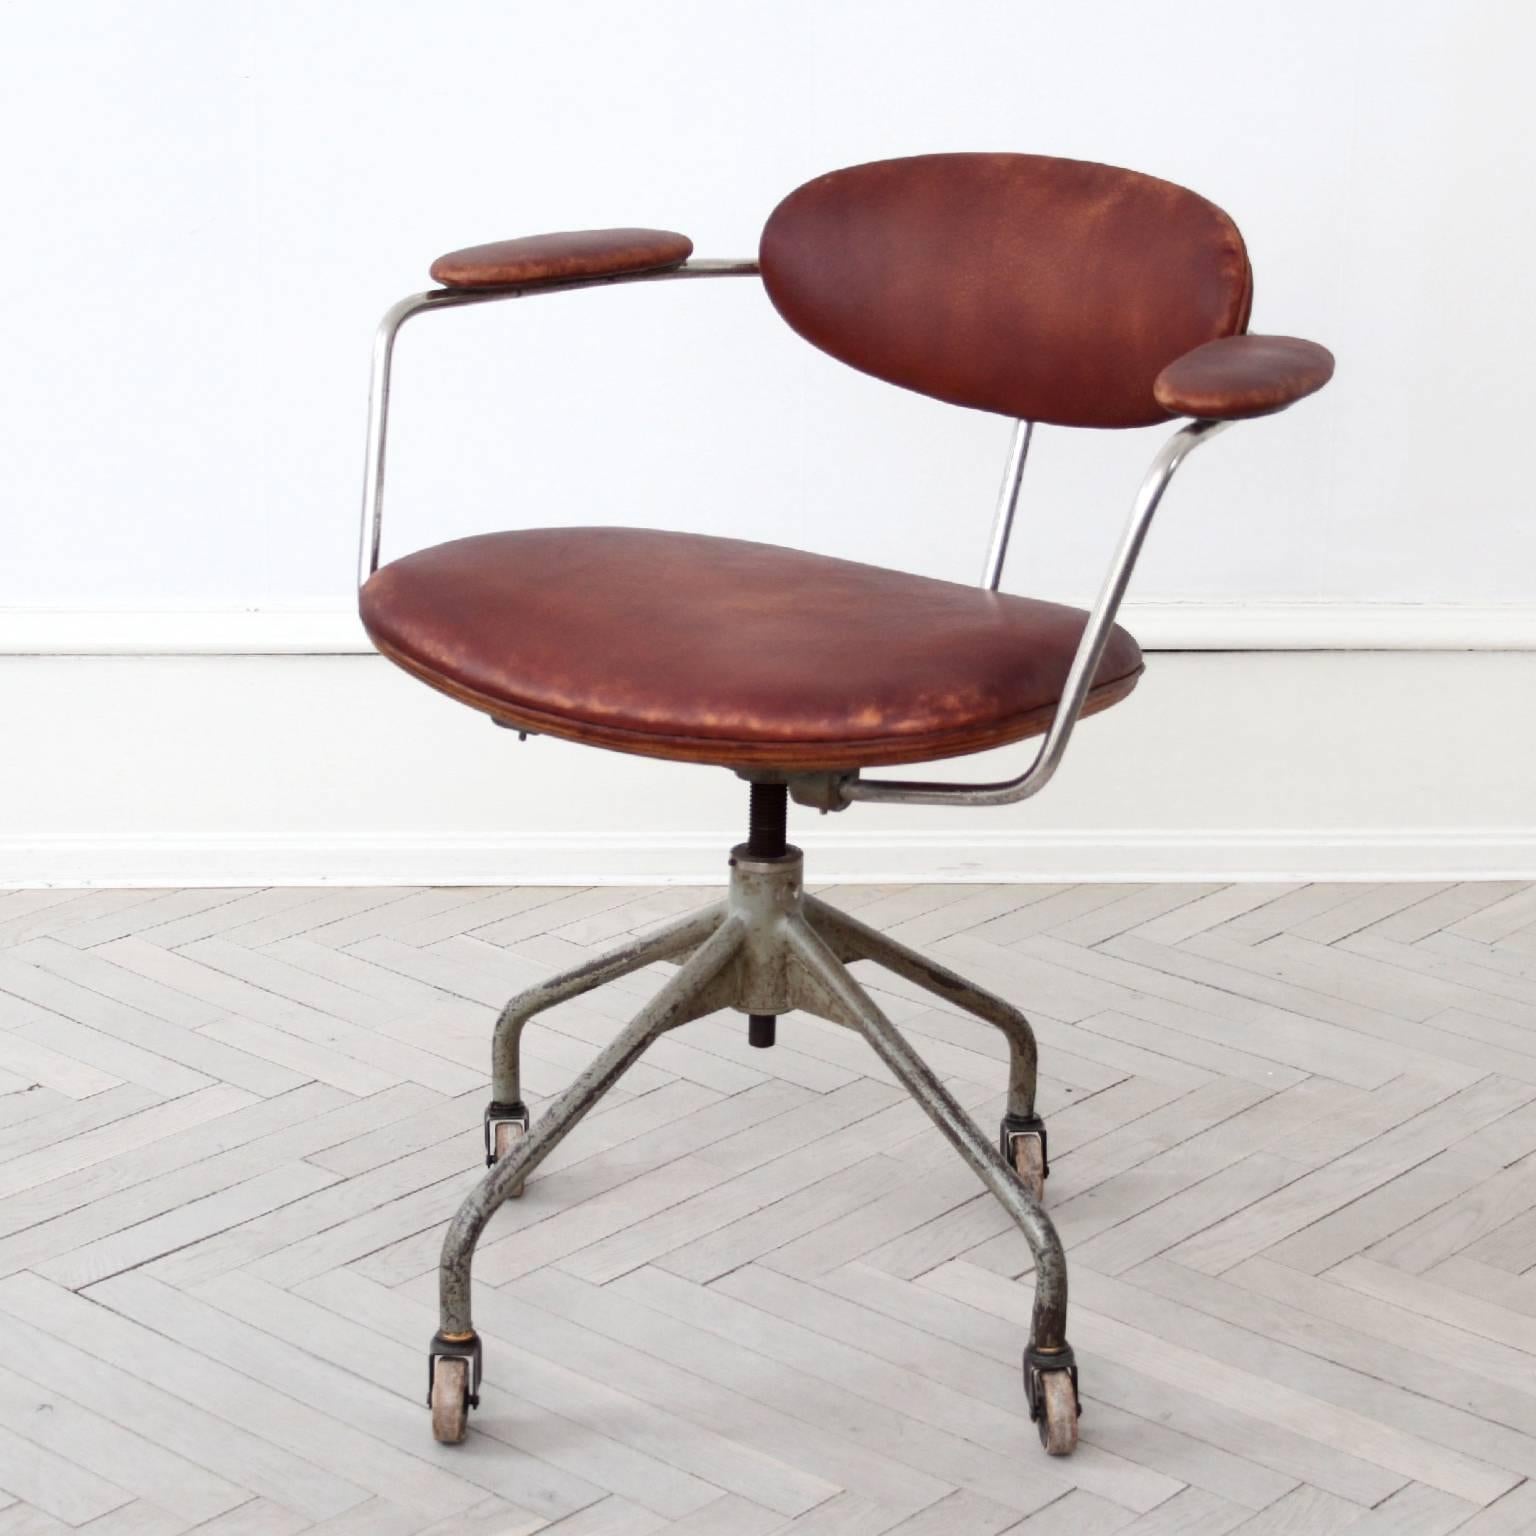 An extremely rare swivel chair, model B 621 designed by Hans J. Wegner.

Top with chromed steel, gray painted height adjustable base mounted on castors. Seat, back and armrests upholstered with brown leather, reverse side of seat and back with